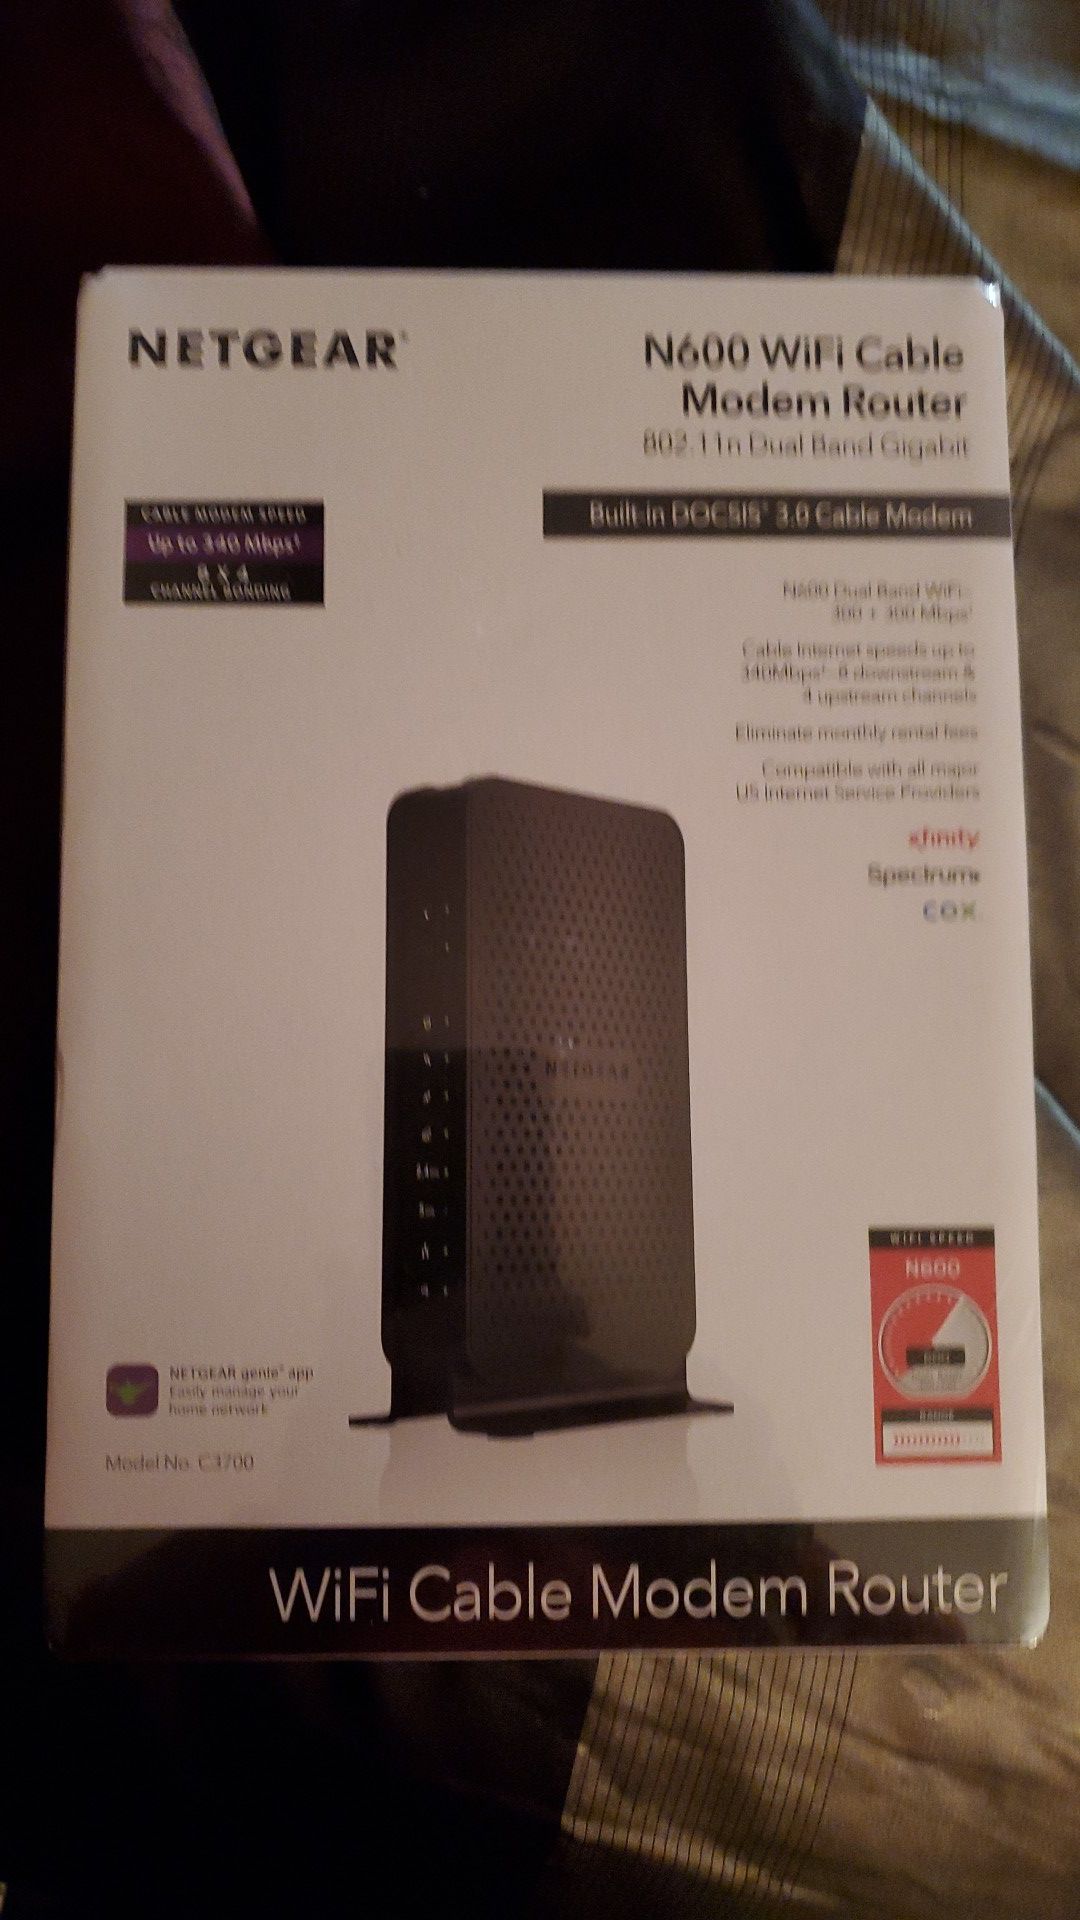 Brand new Netgear wifi cable modem router